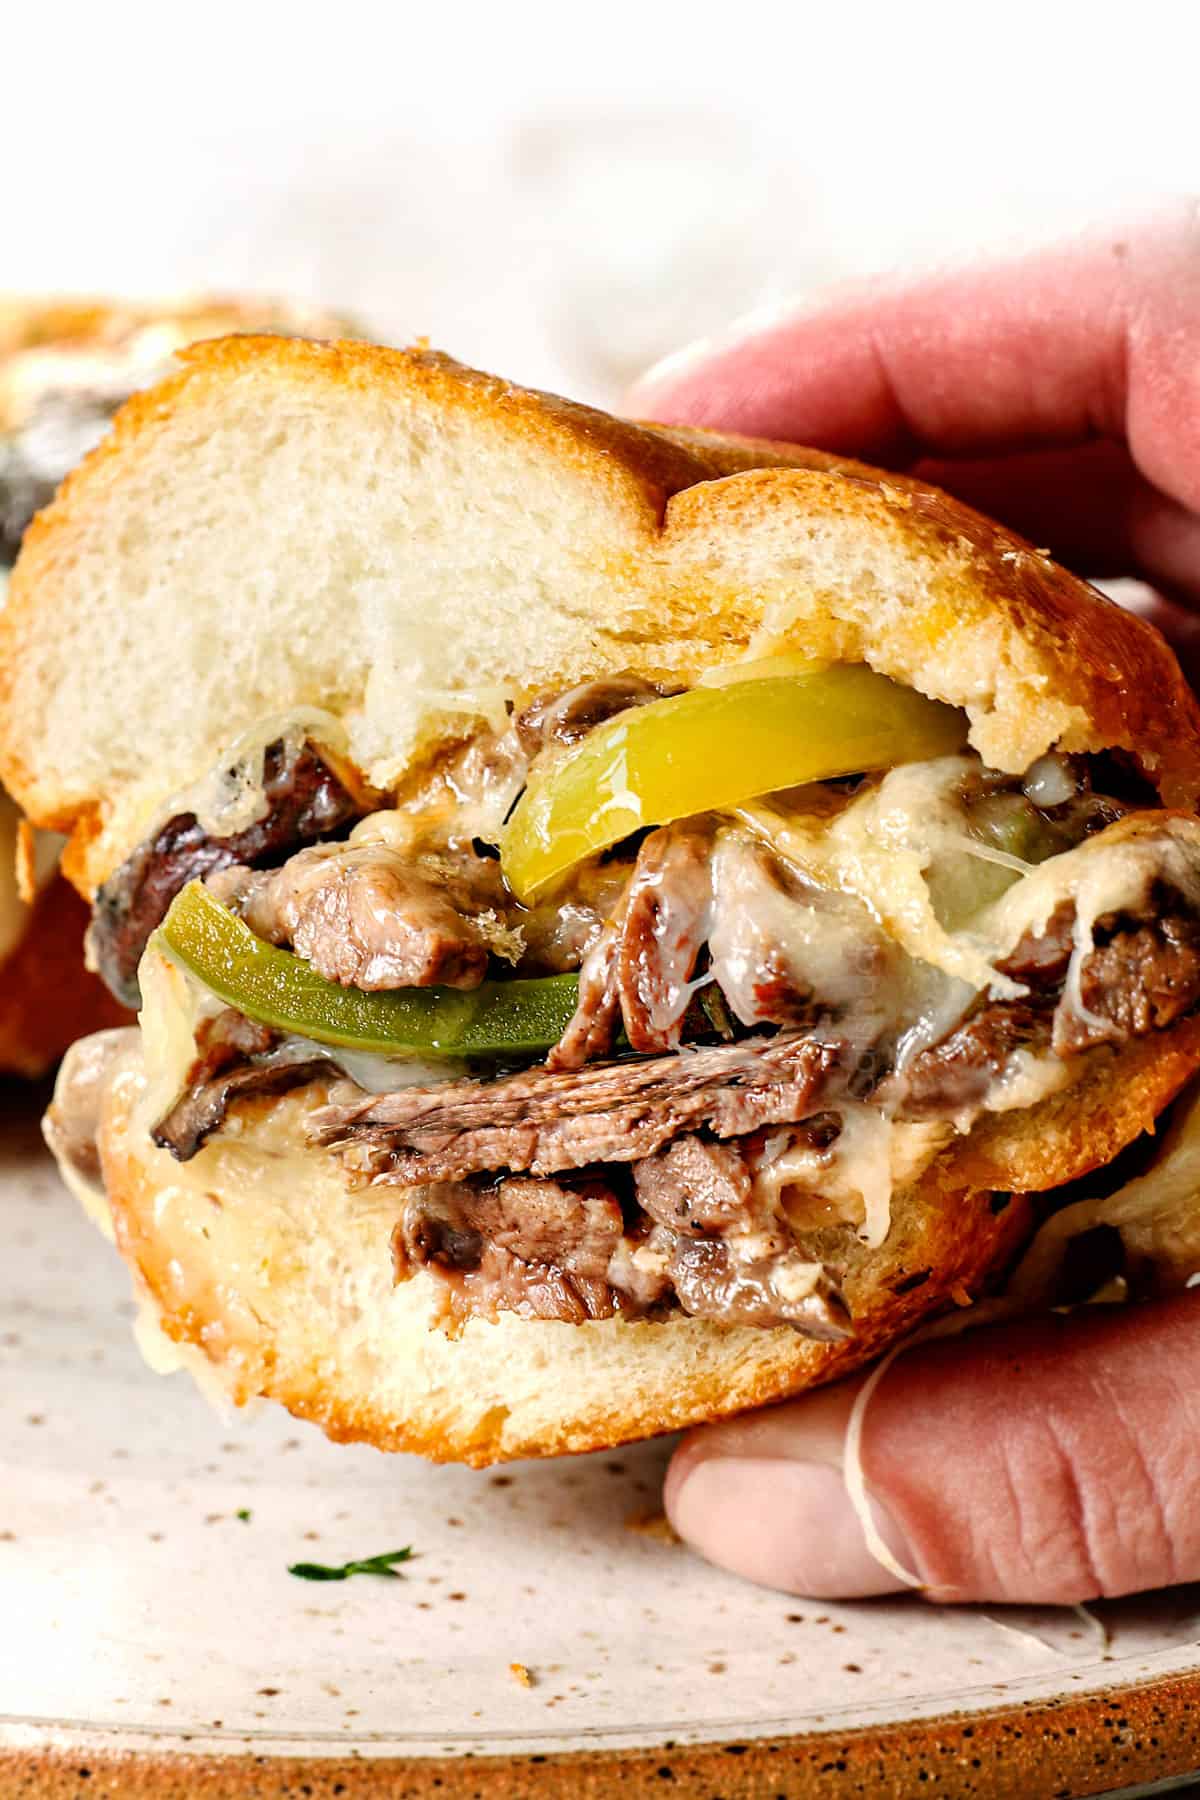 up close of a bite taken out of a Philly Cheesesteak recipe showing how tender the beef is and how cheesy it is